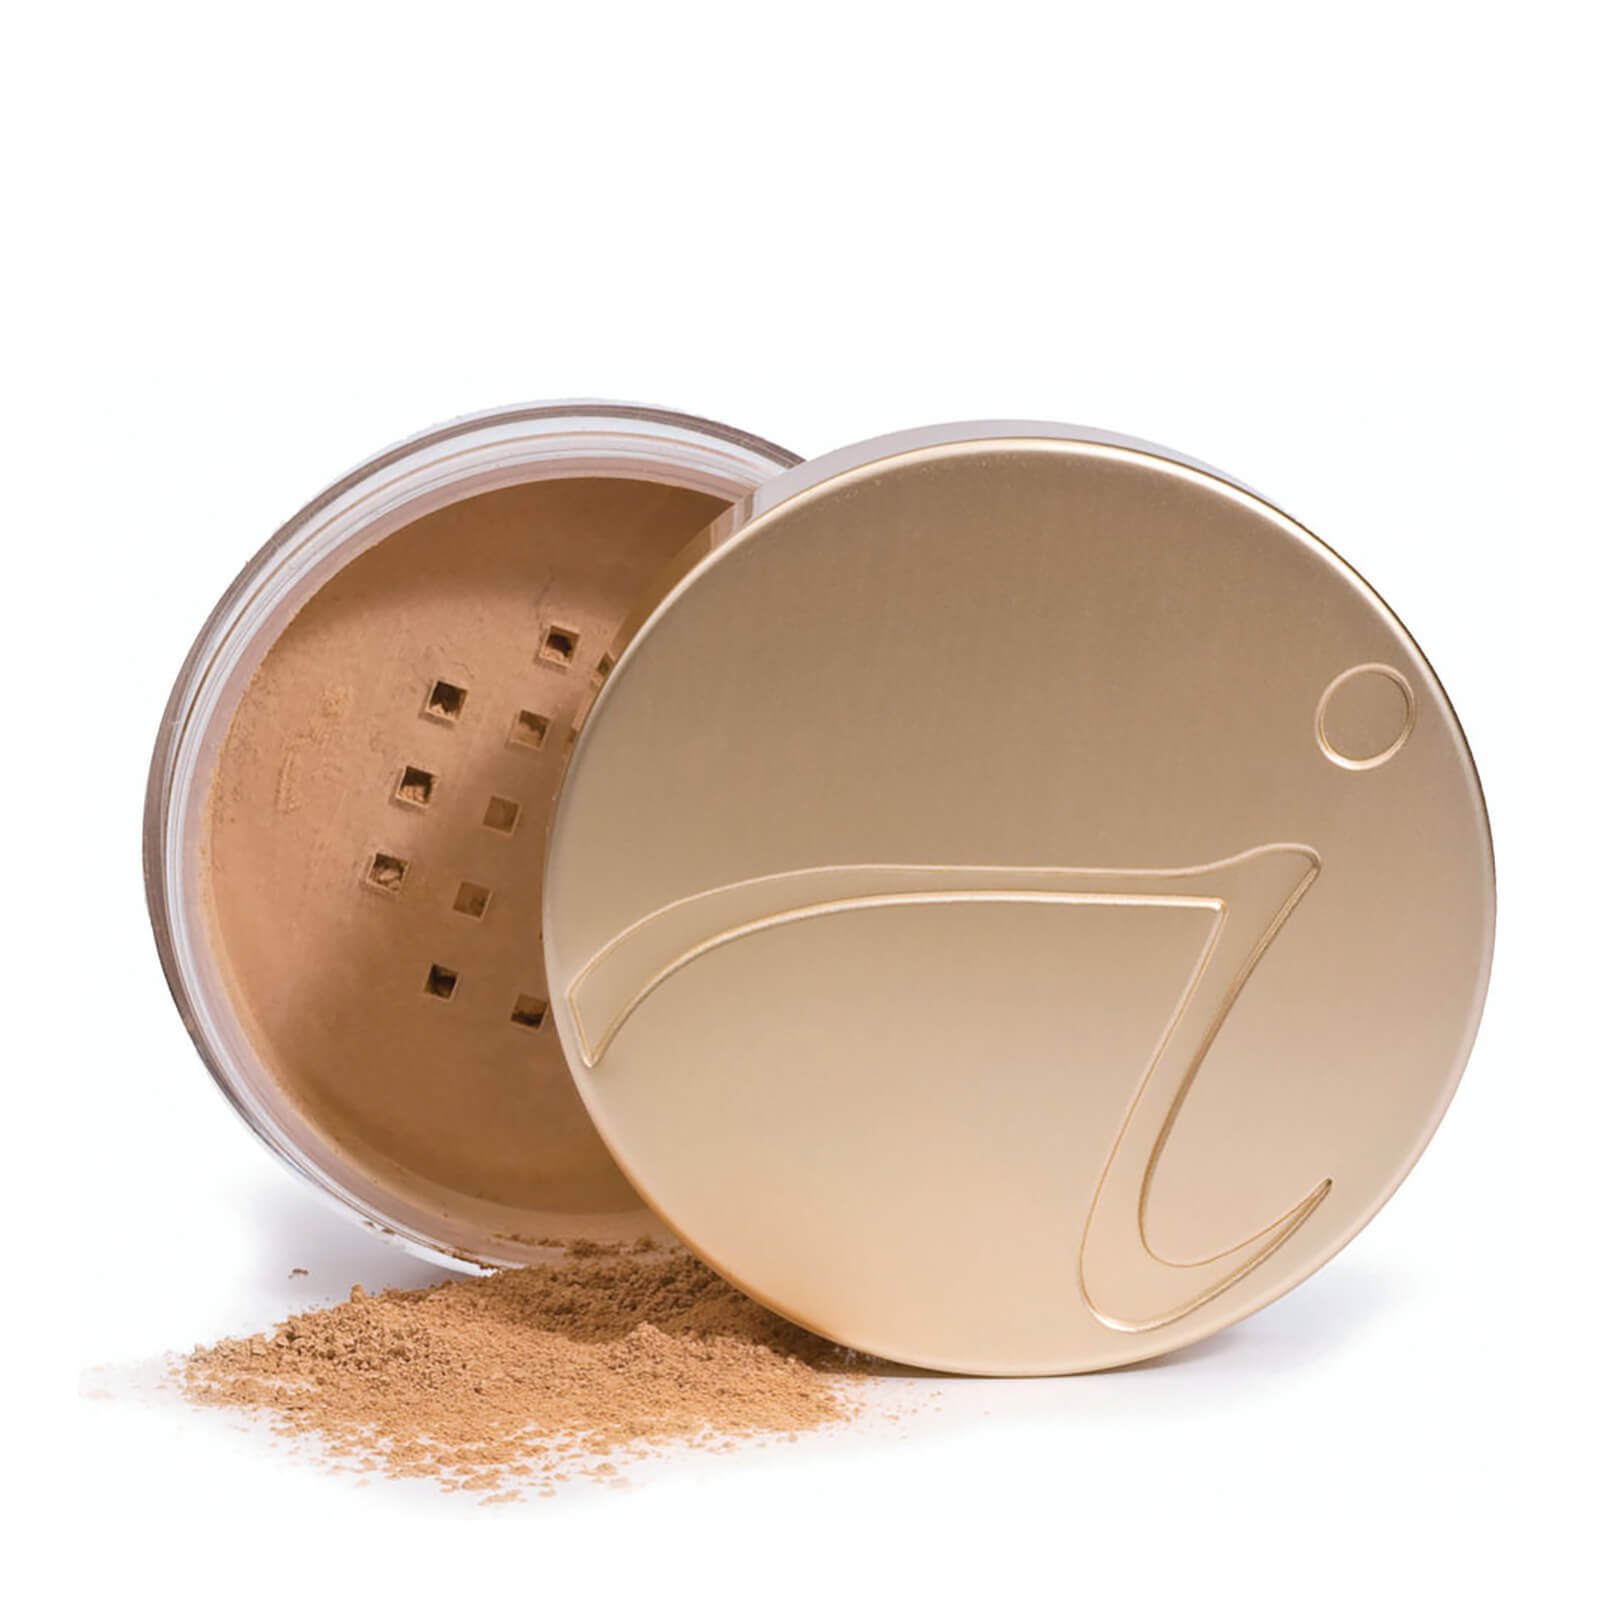 Jane Iredale Amazing Base Mineral Powder Review 1